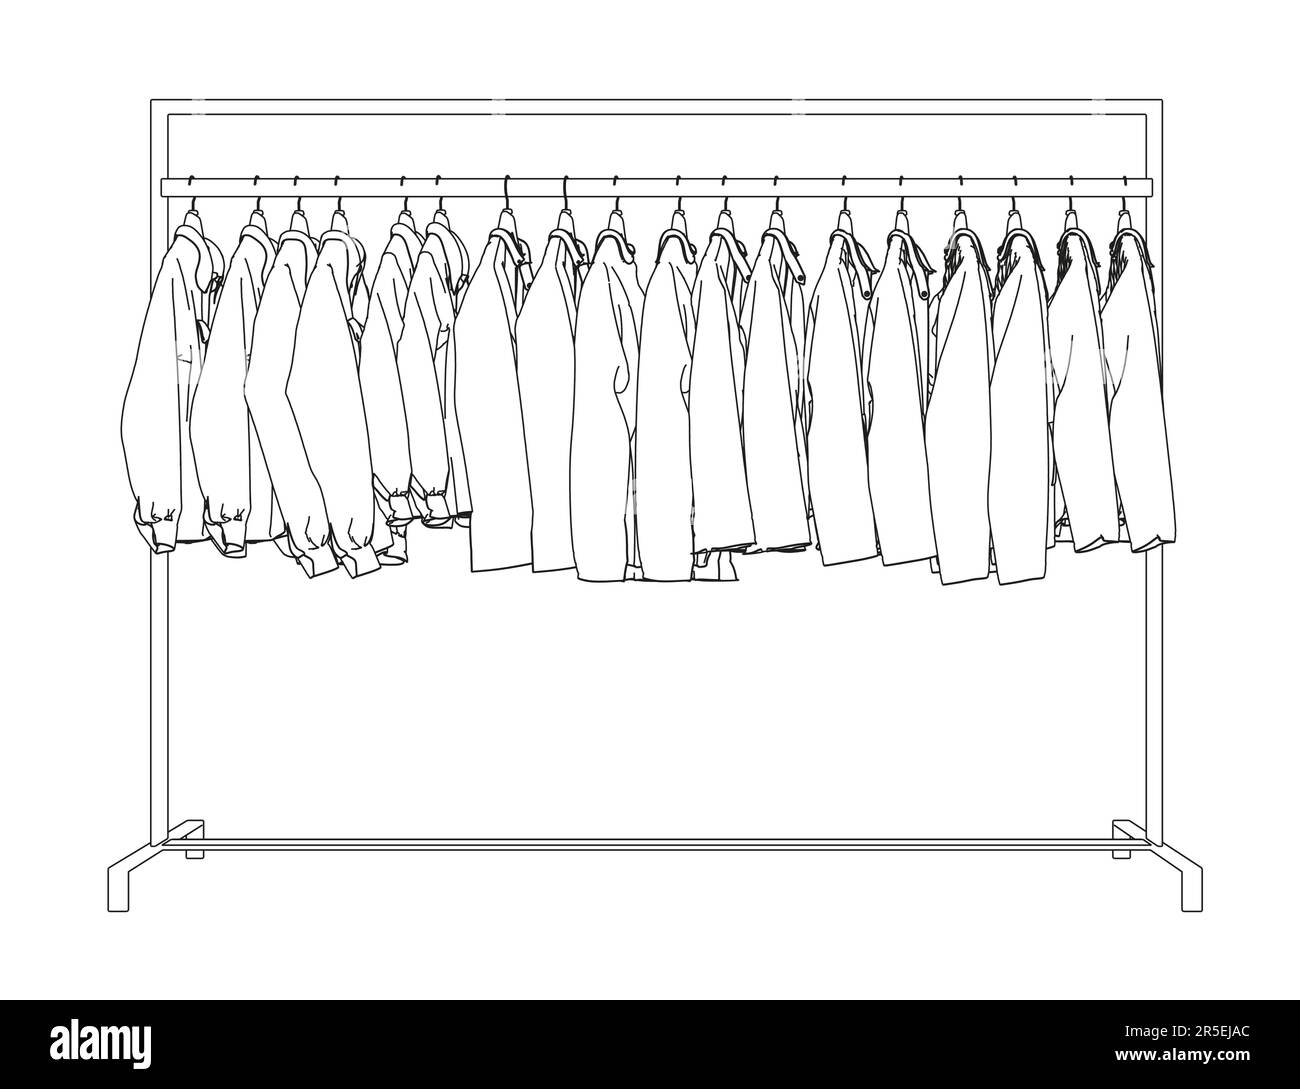 Outline of clothes hanging on hangers from black lines isolated on ...